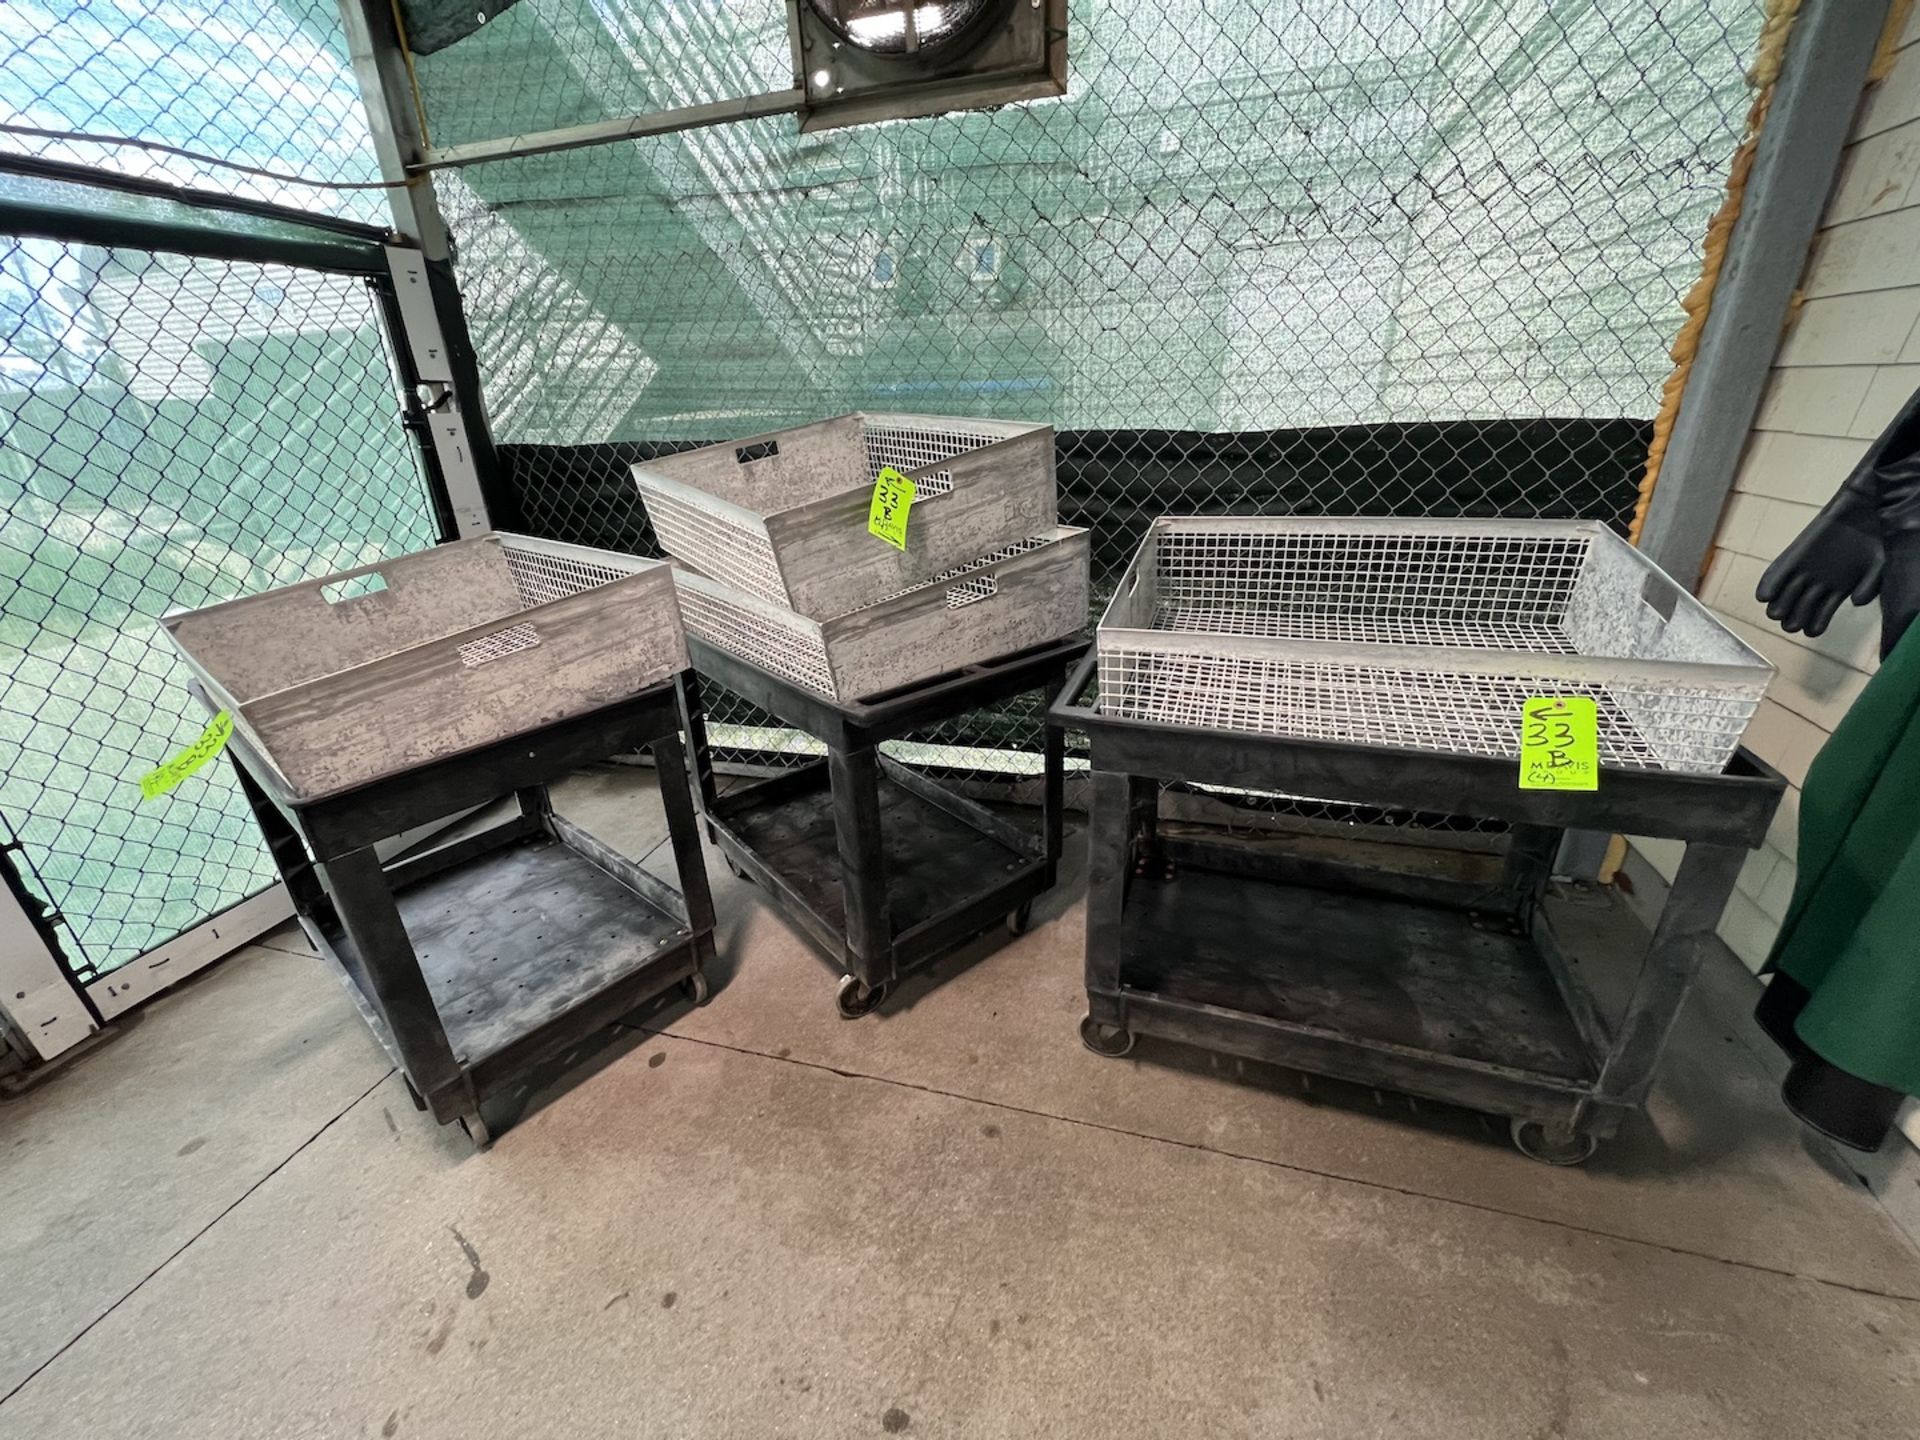 (4) TOTES FOR TILT BRAISING TABLES AND (3) PUSH CARTS